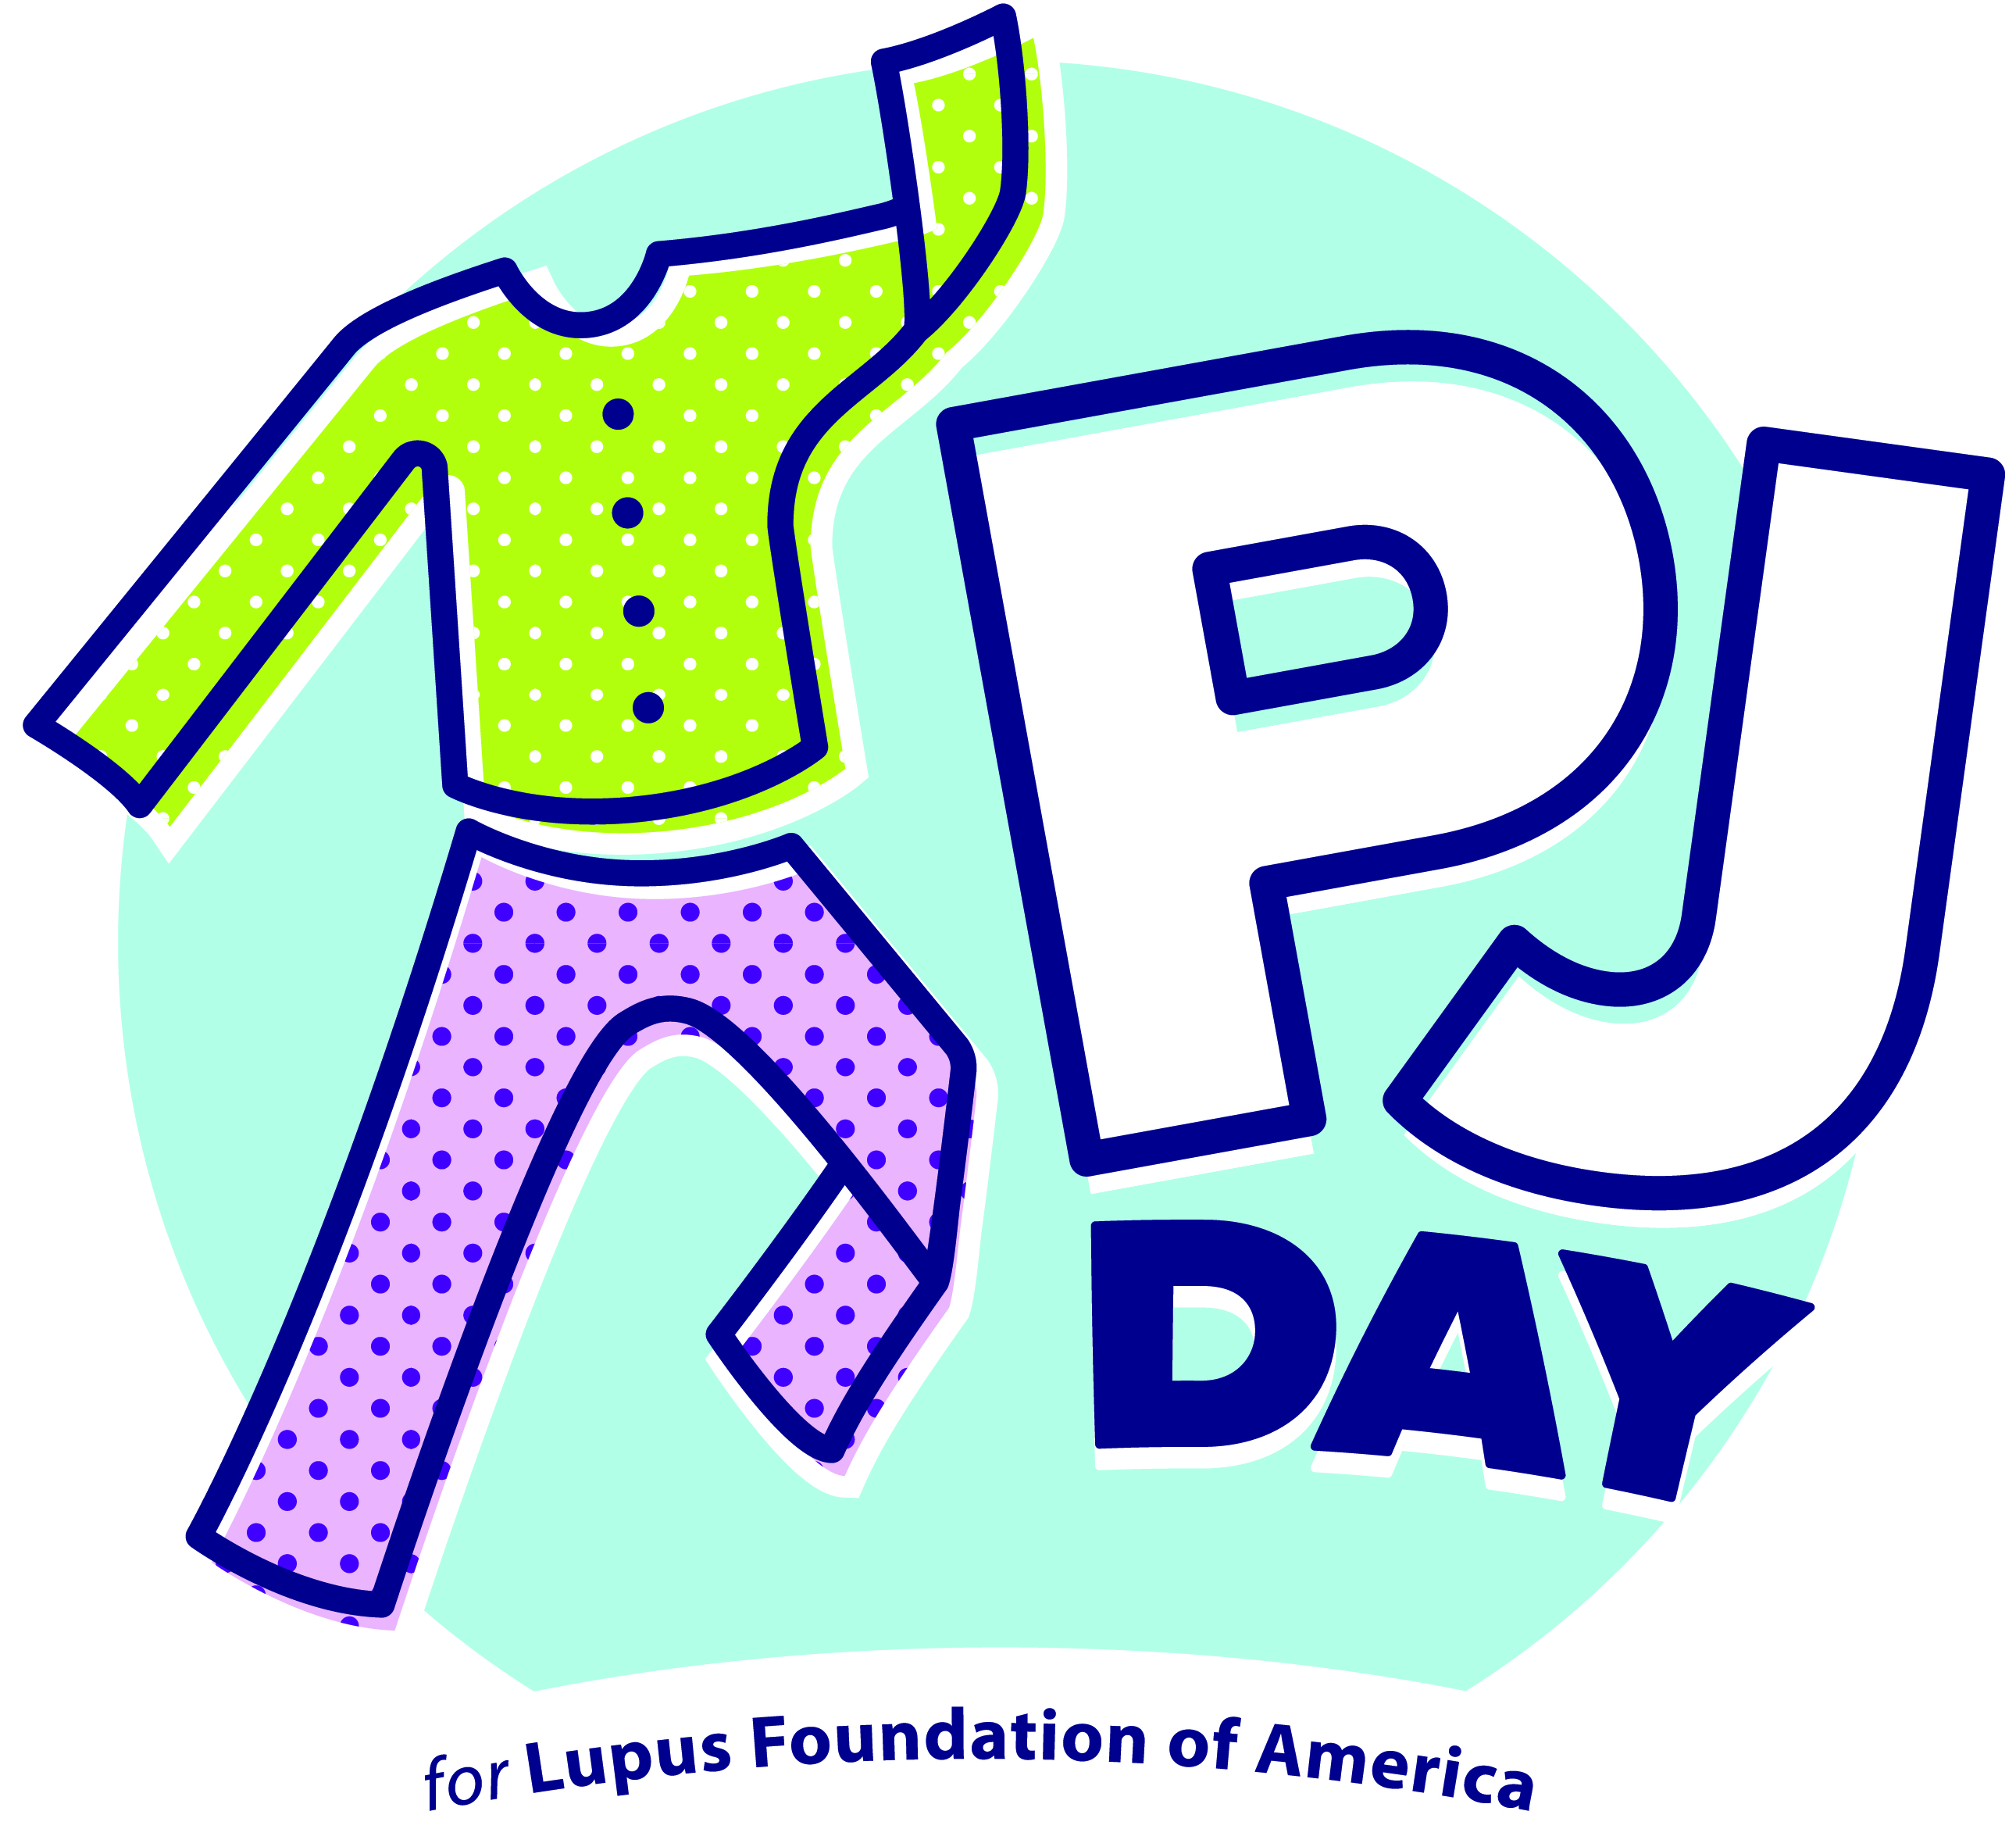 Clip Arts Related To : pj day clip art. 